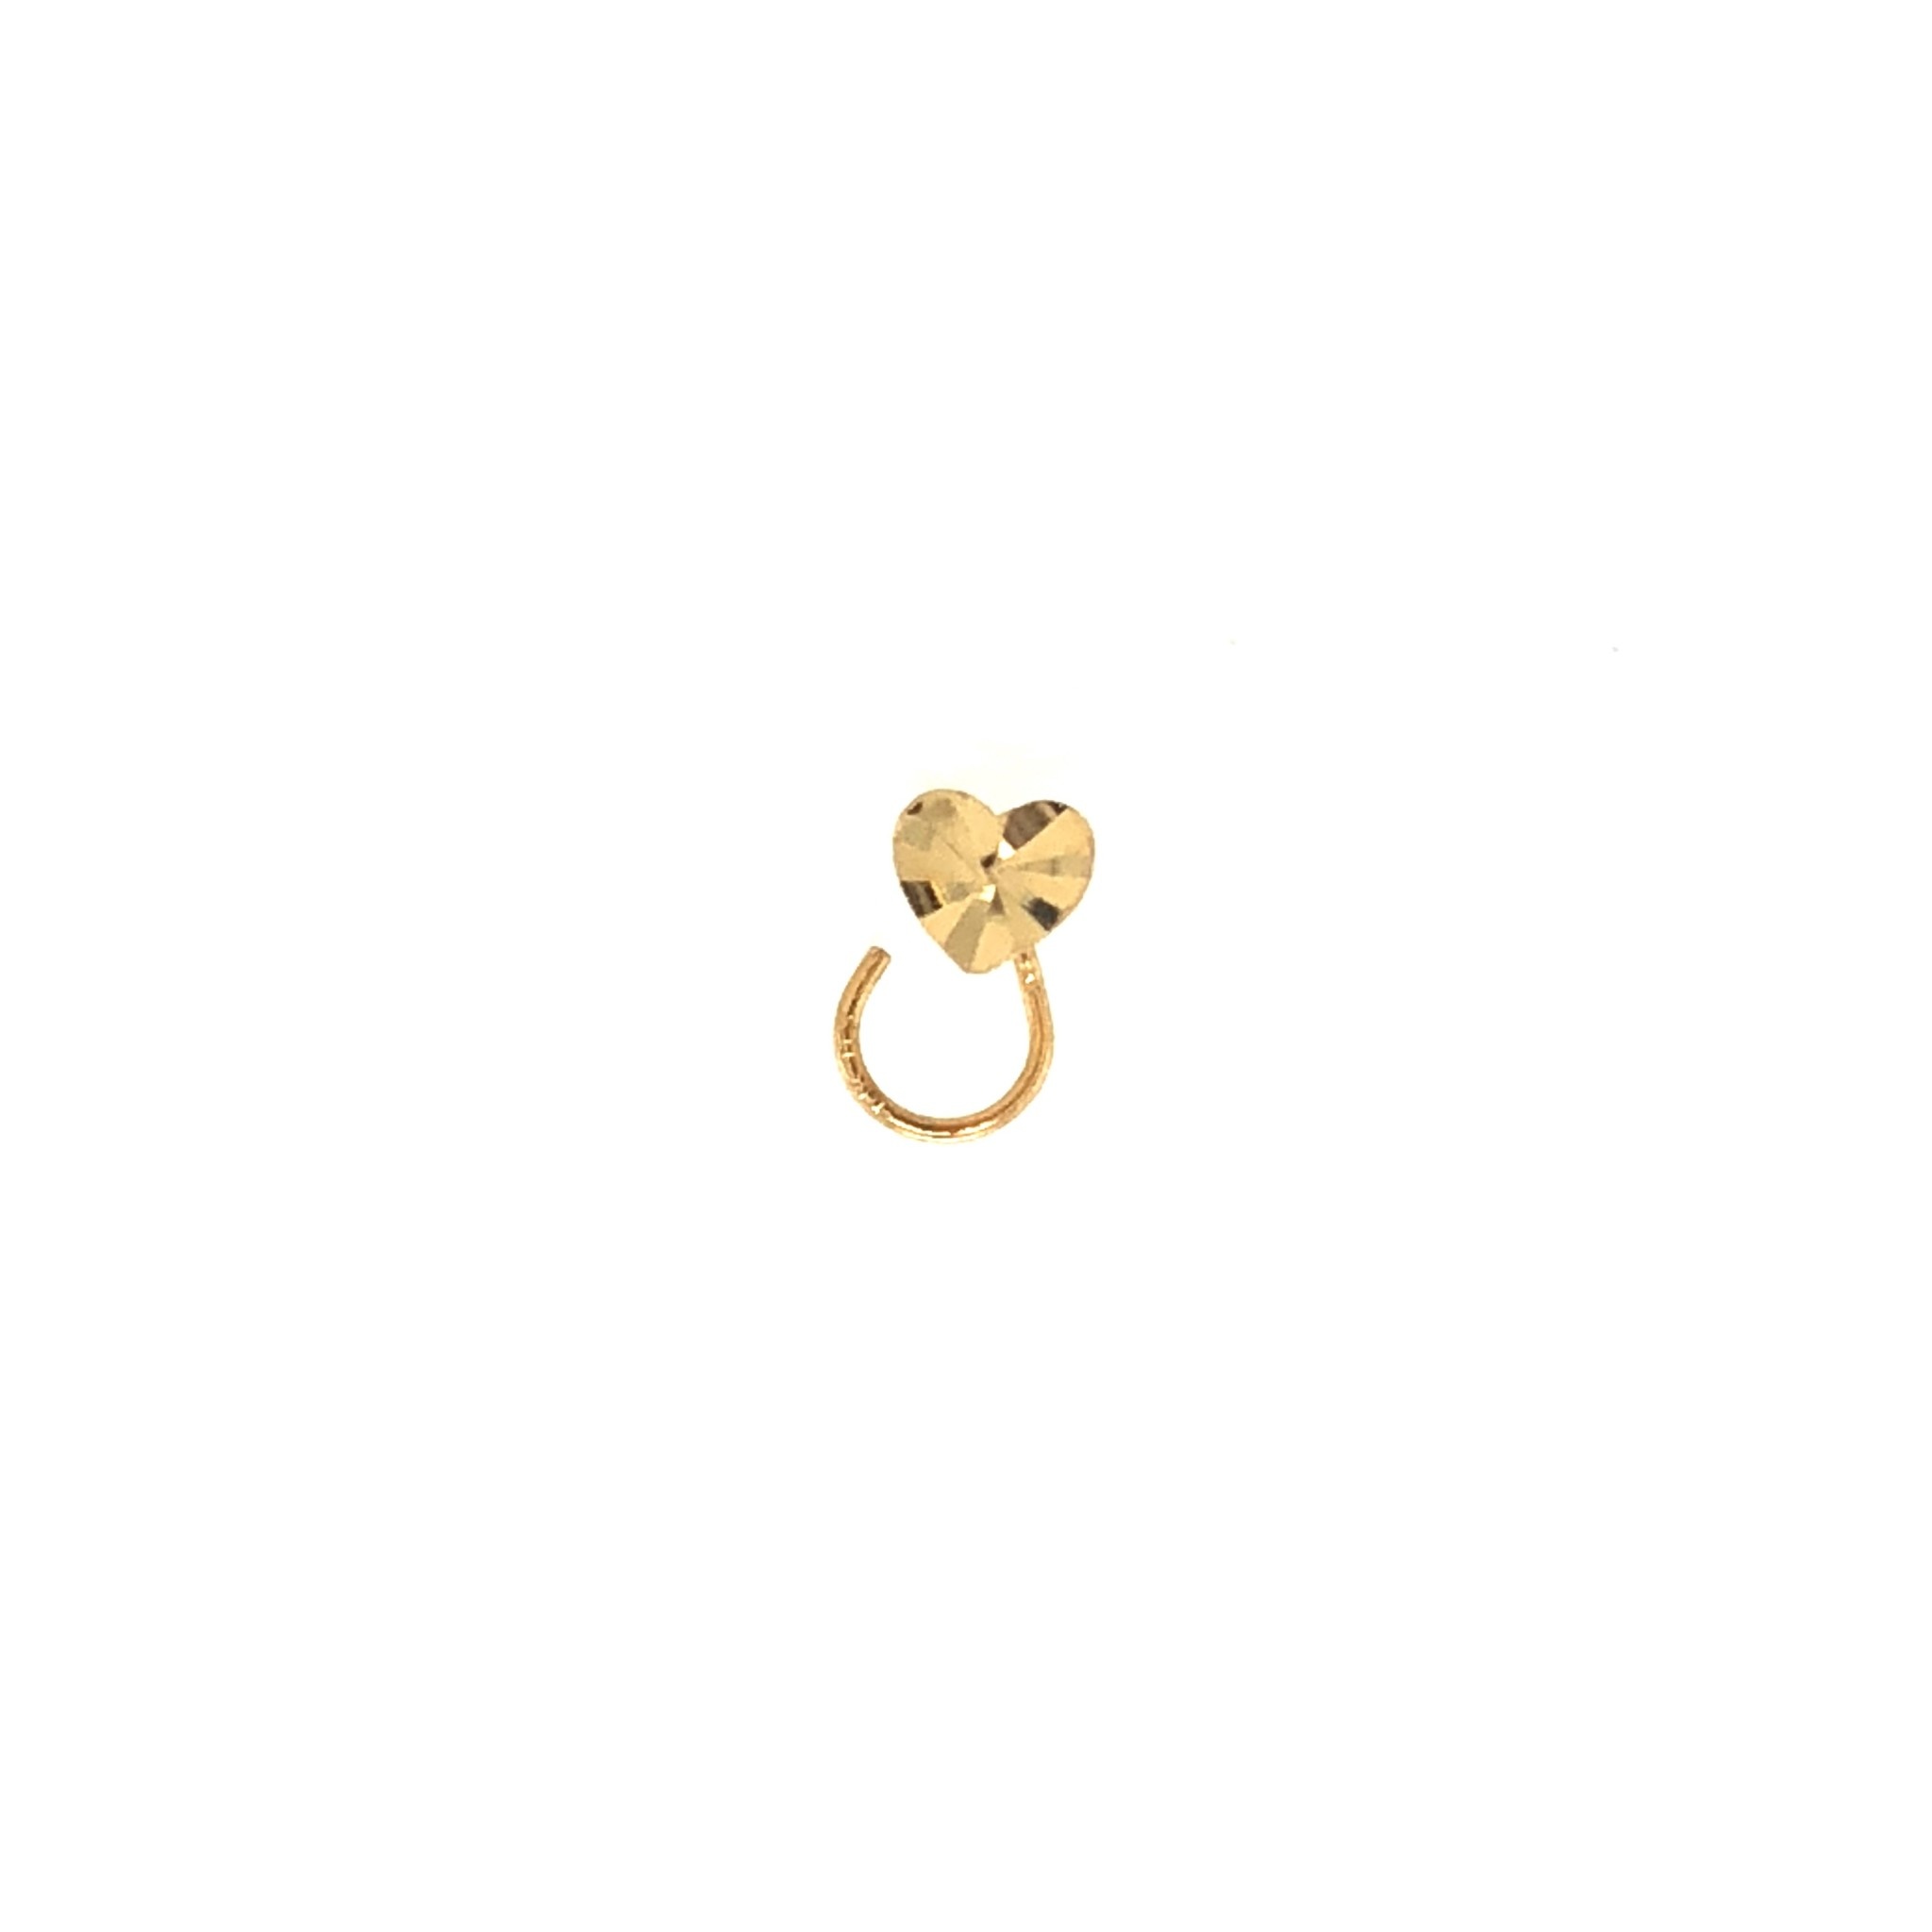 Gold nose ring hoop with diamond cz 14K solid gold